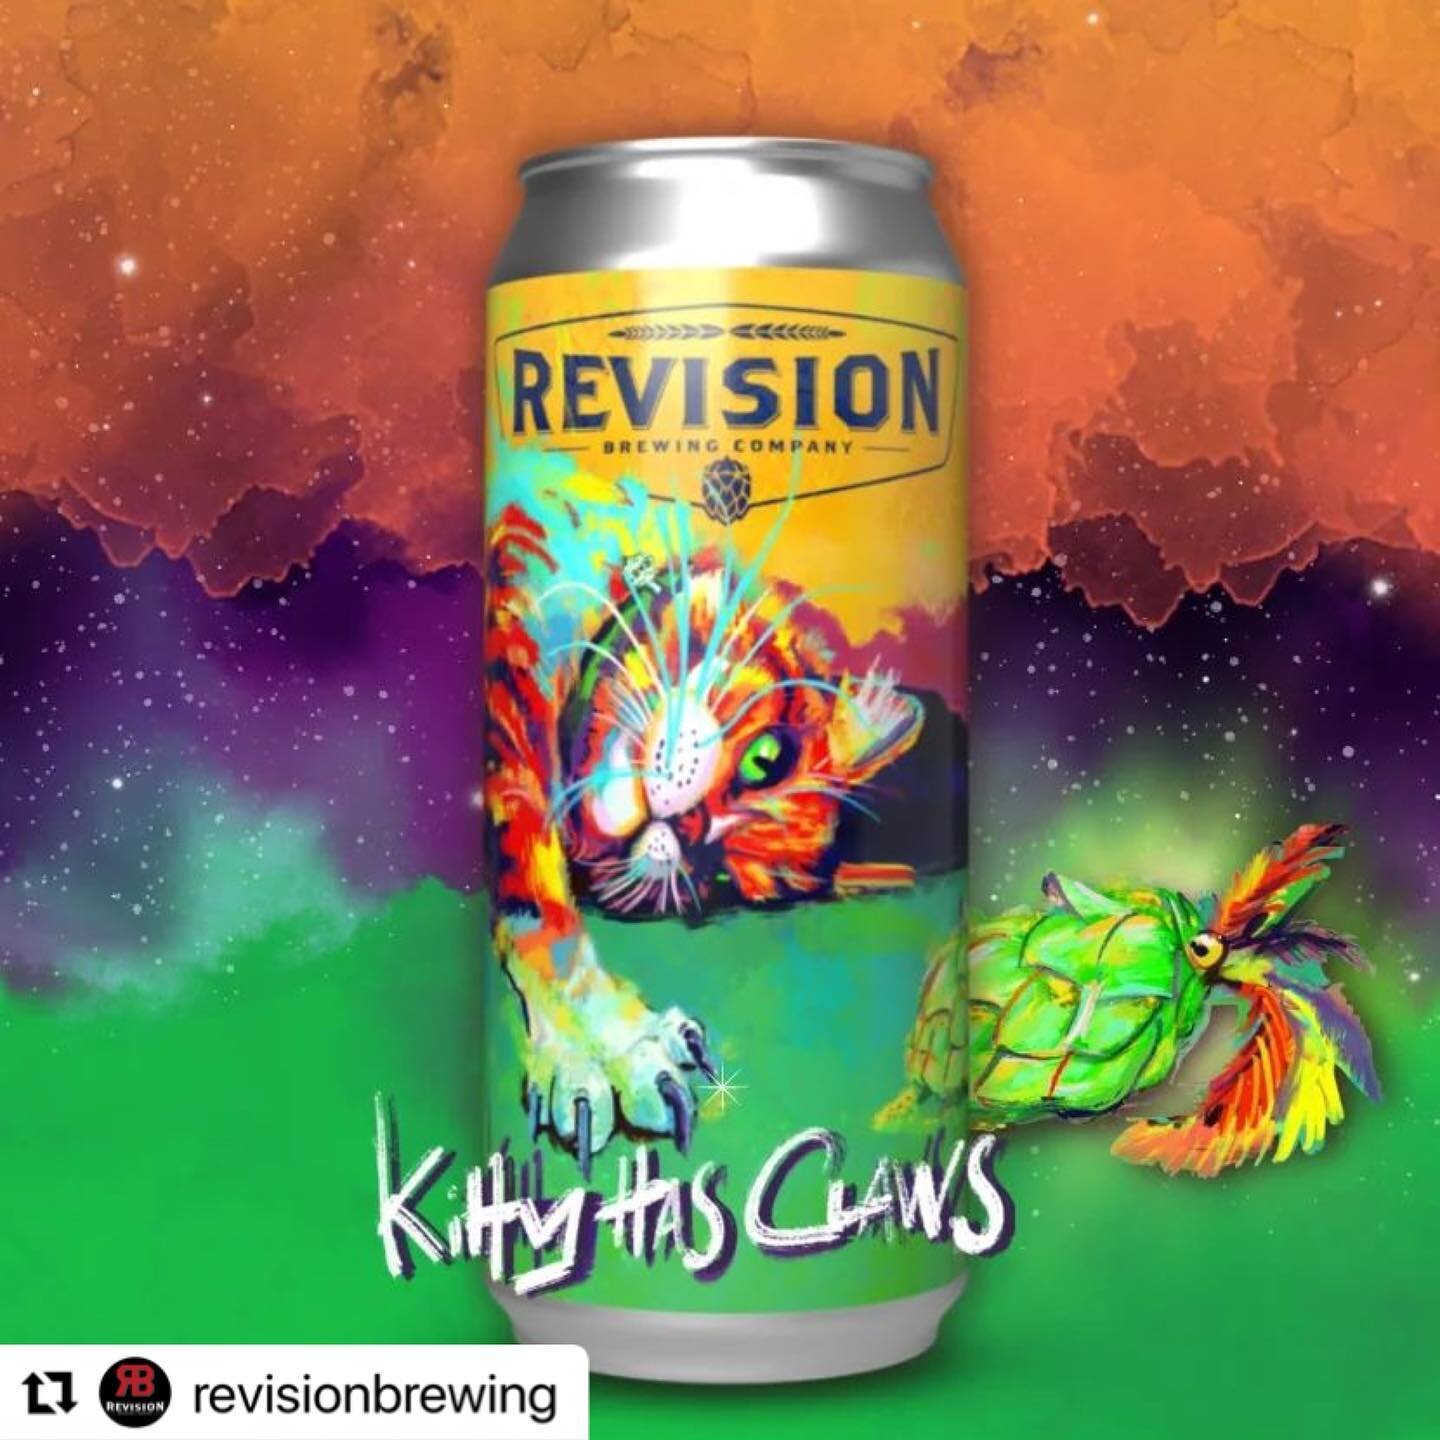 Dropping in #Florida this week!@revisionbrewing

Kitty Has Claws
NE-Style Hazy IPA
7% ABV | 30 IBU

The cat's out of the bag - well, technically, Kitty Has Claws is out of the brite tank. This Strata blasted NE-Style IPA is bright and fruity with a h